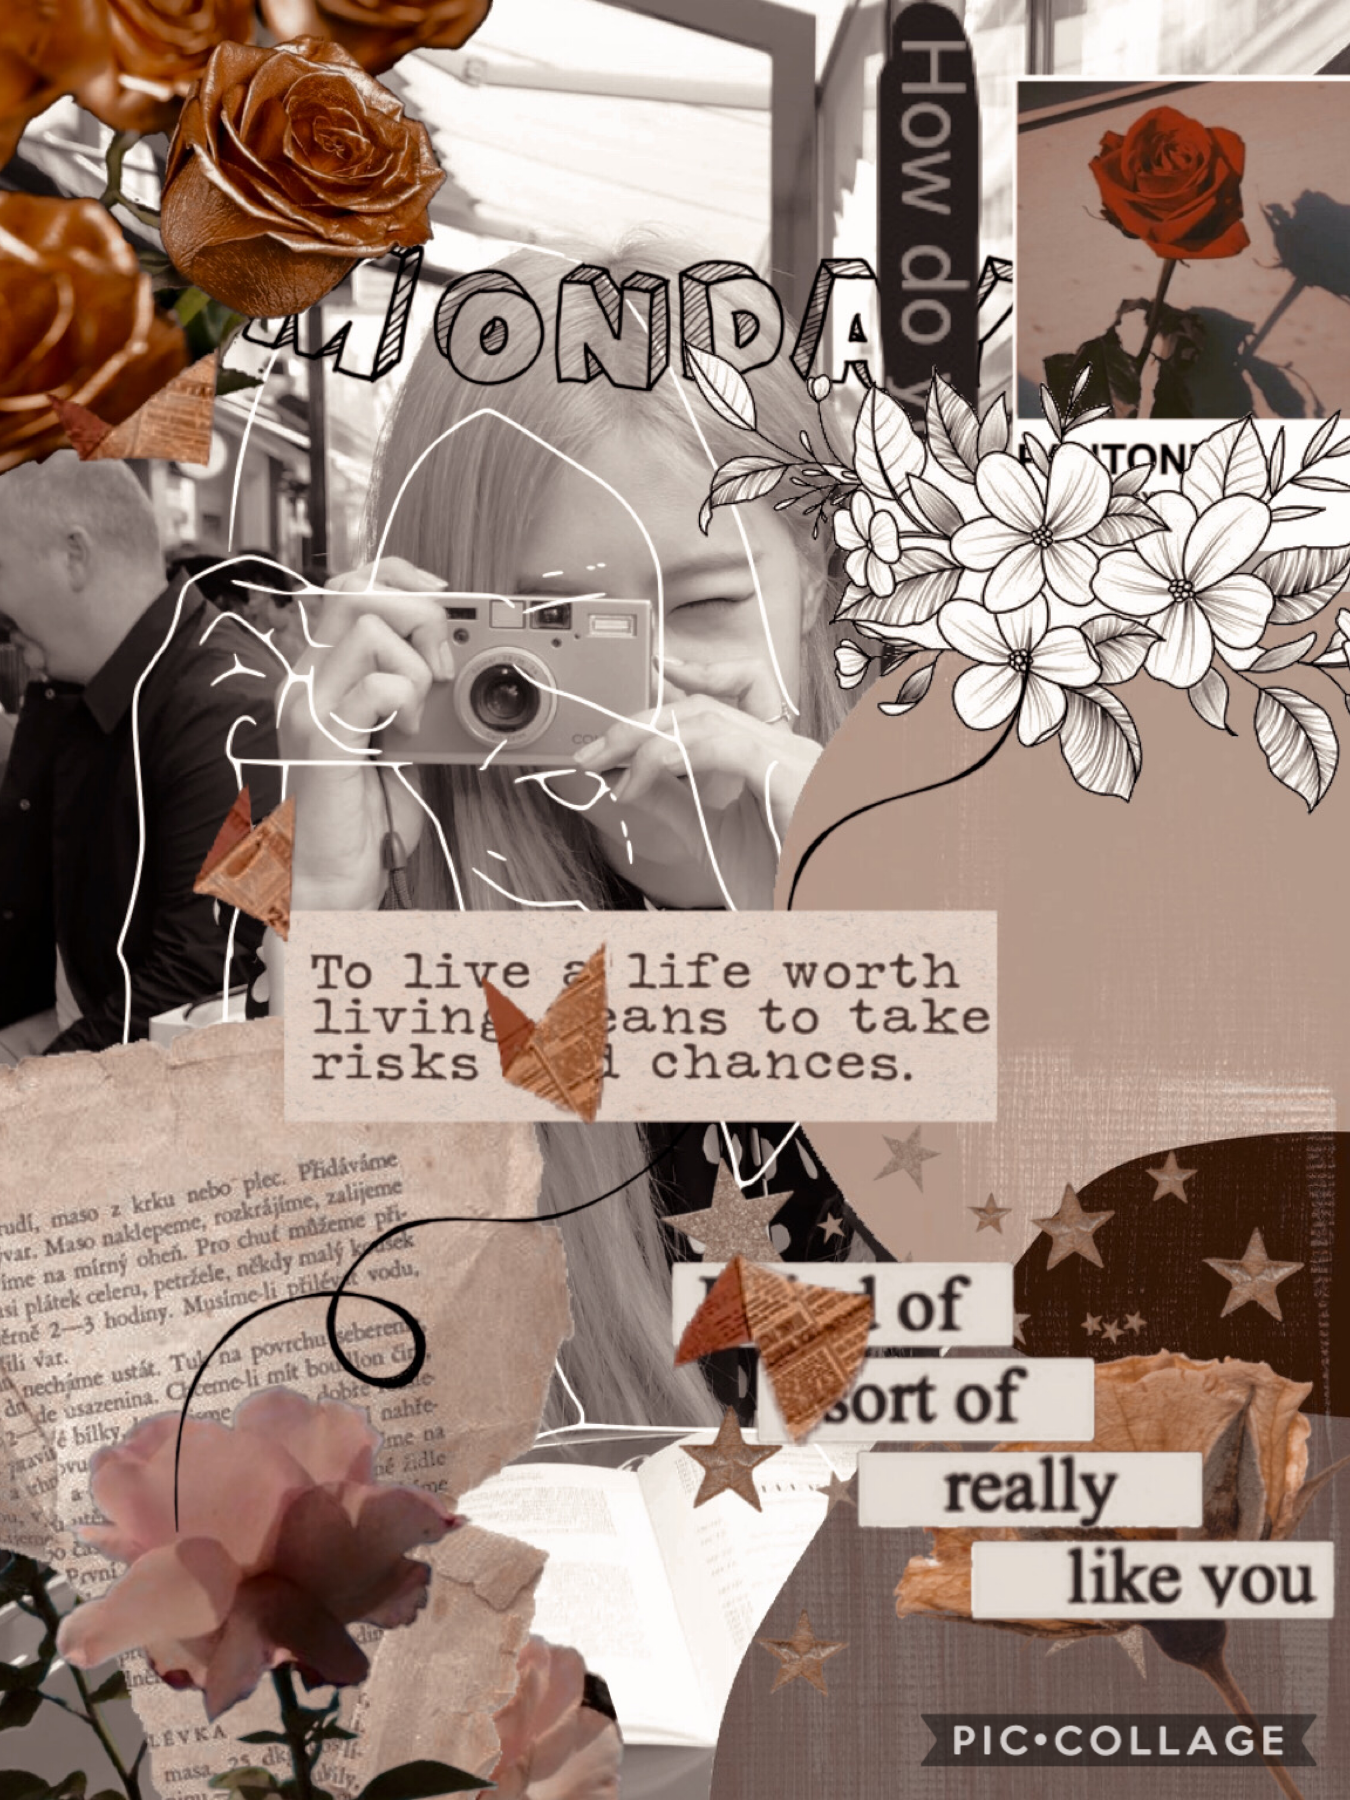 Collage by -mycupofrabbits